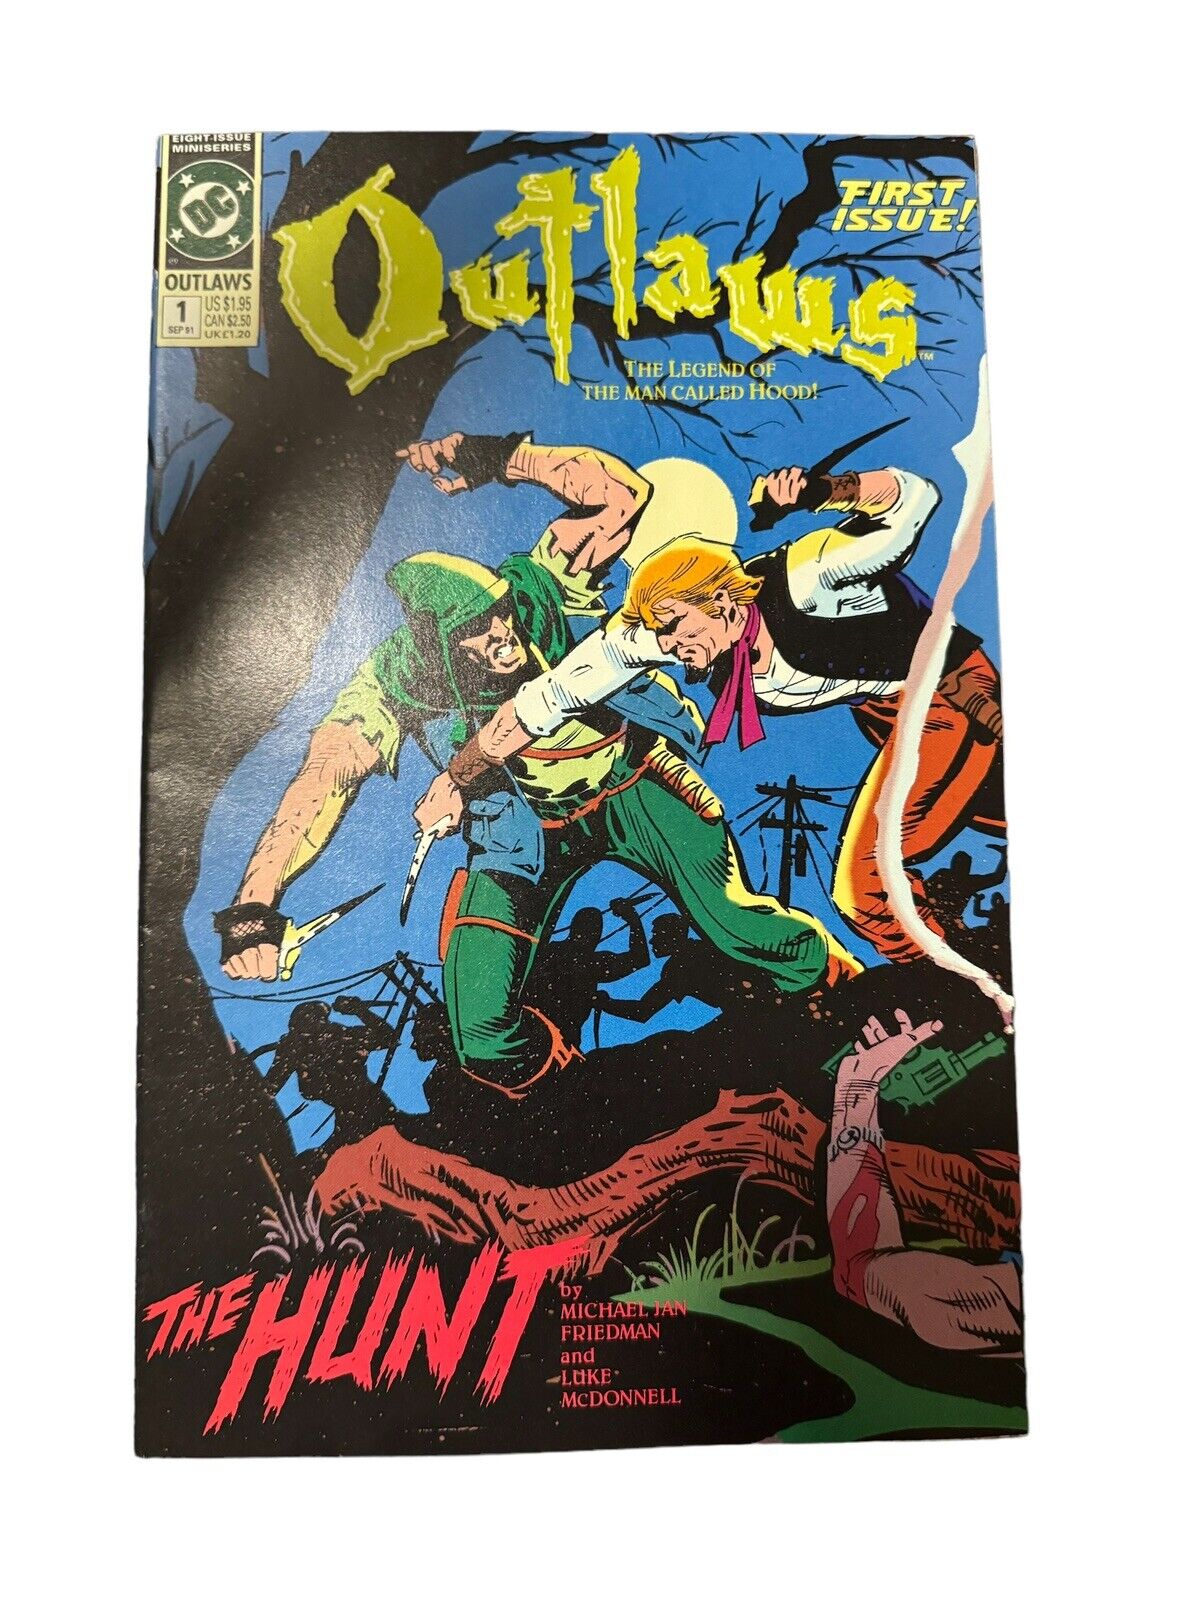 Outlaws - First Issue - The Legends of the Man Called Hood - September 1991